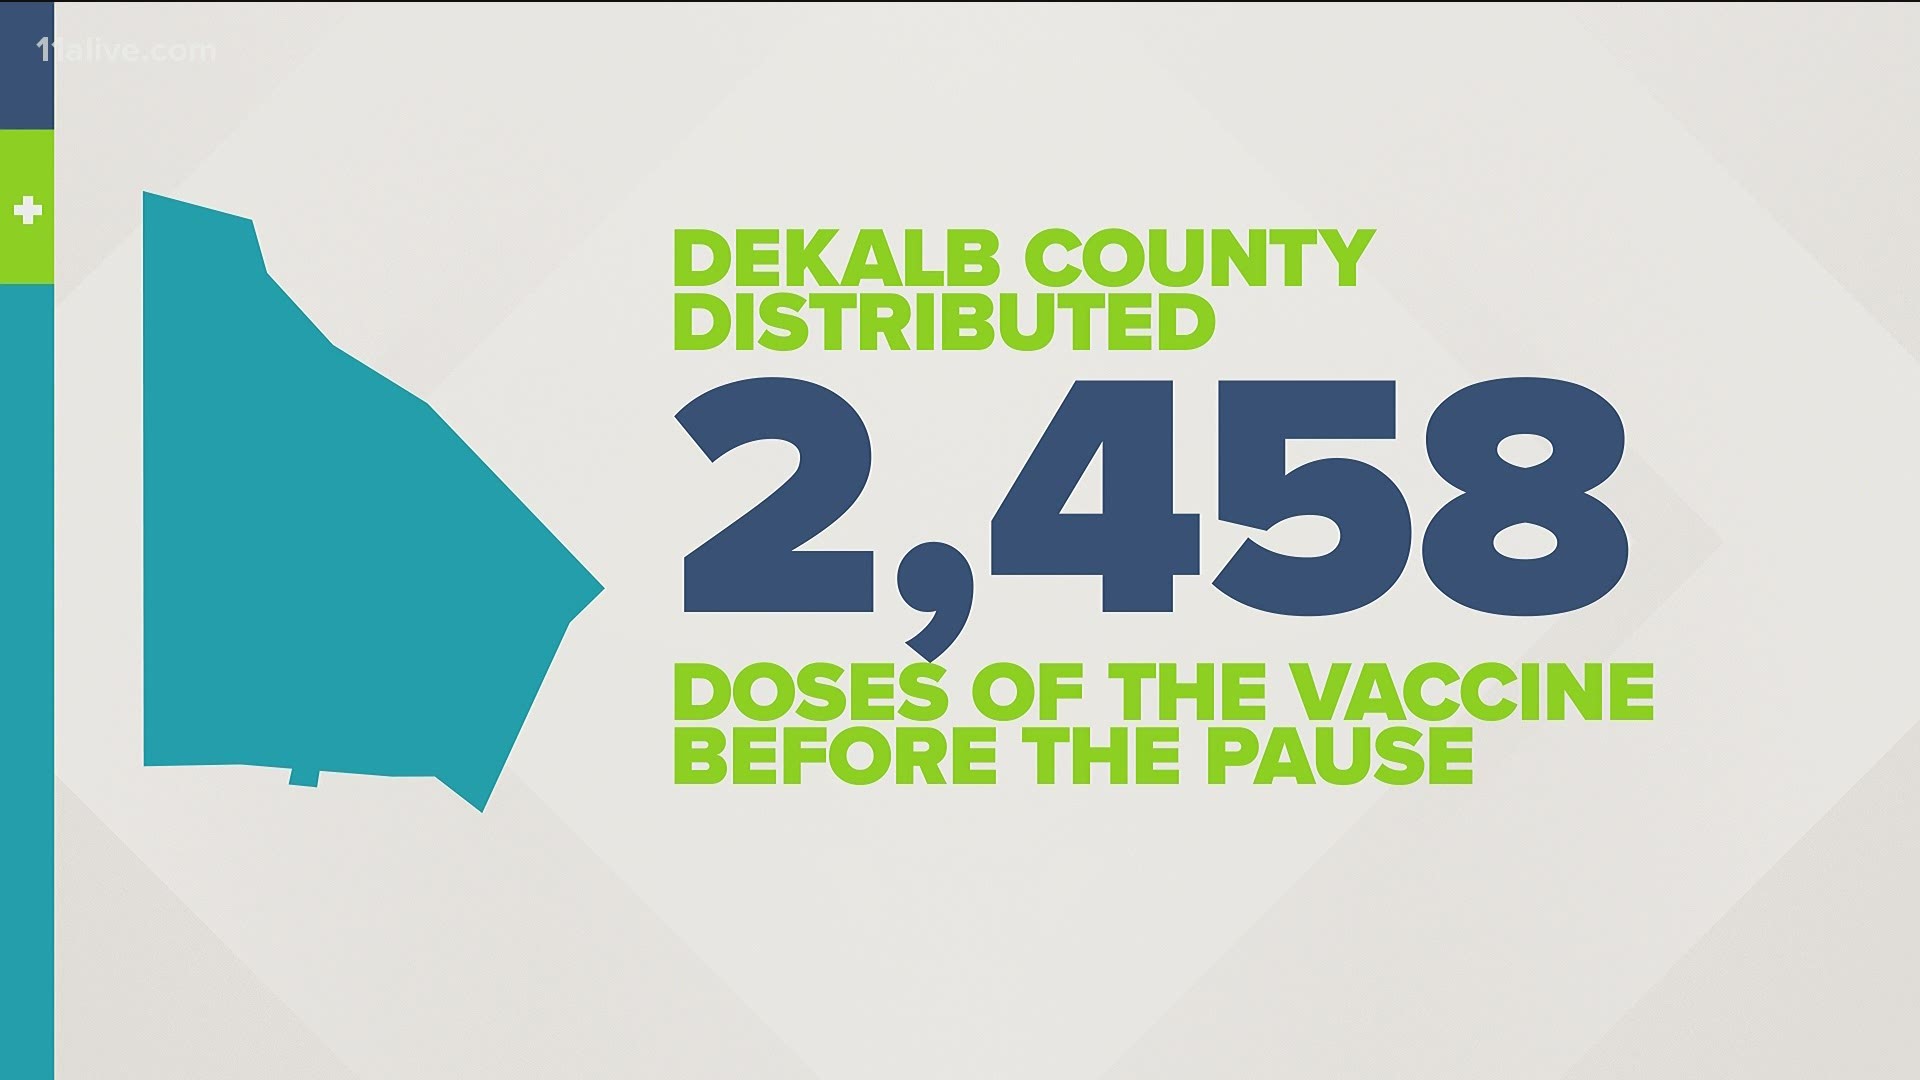 Dekalb County made the switch away from the Johnson and Johnson vaccine just one hour before its first vaccine appointment.